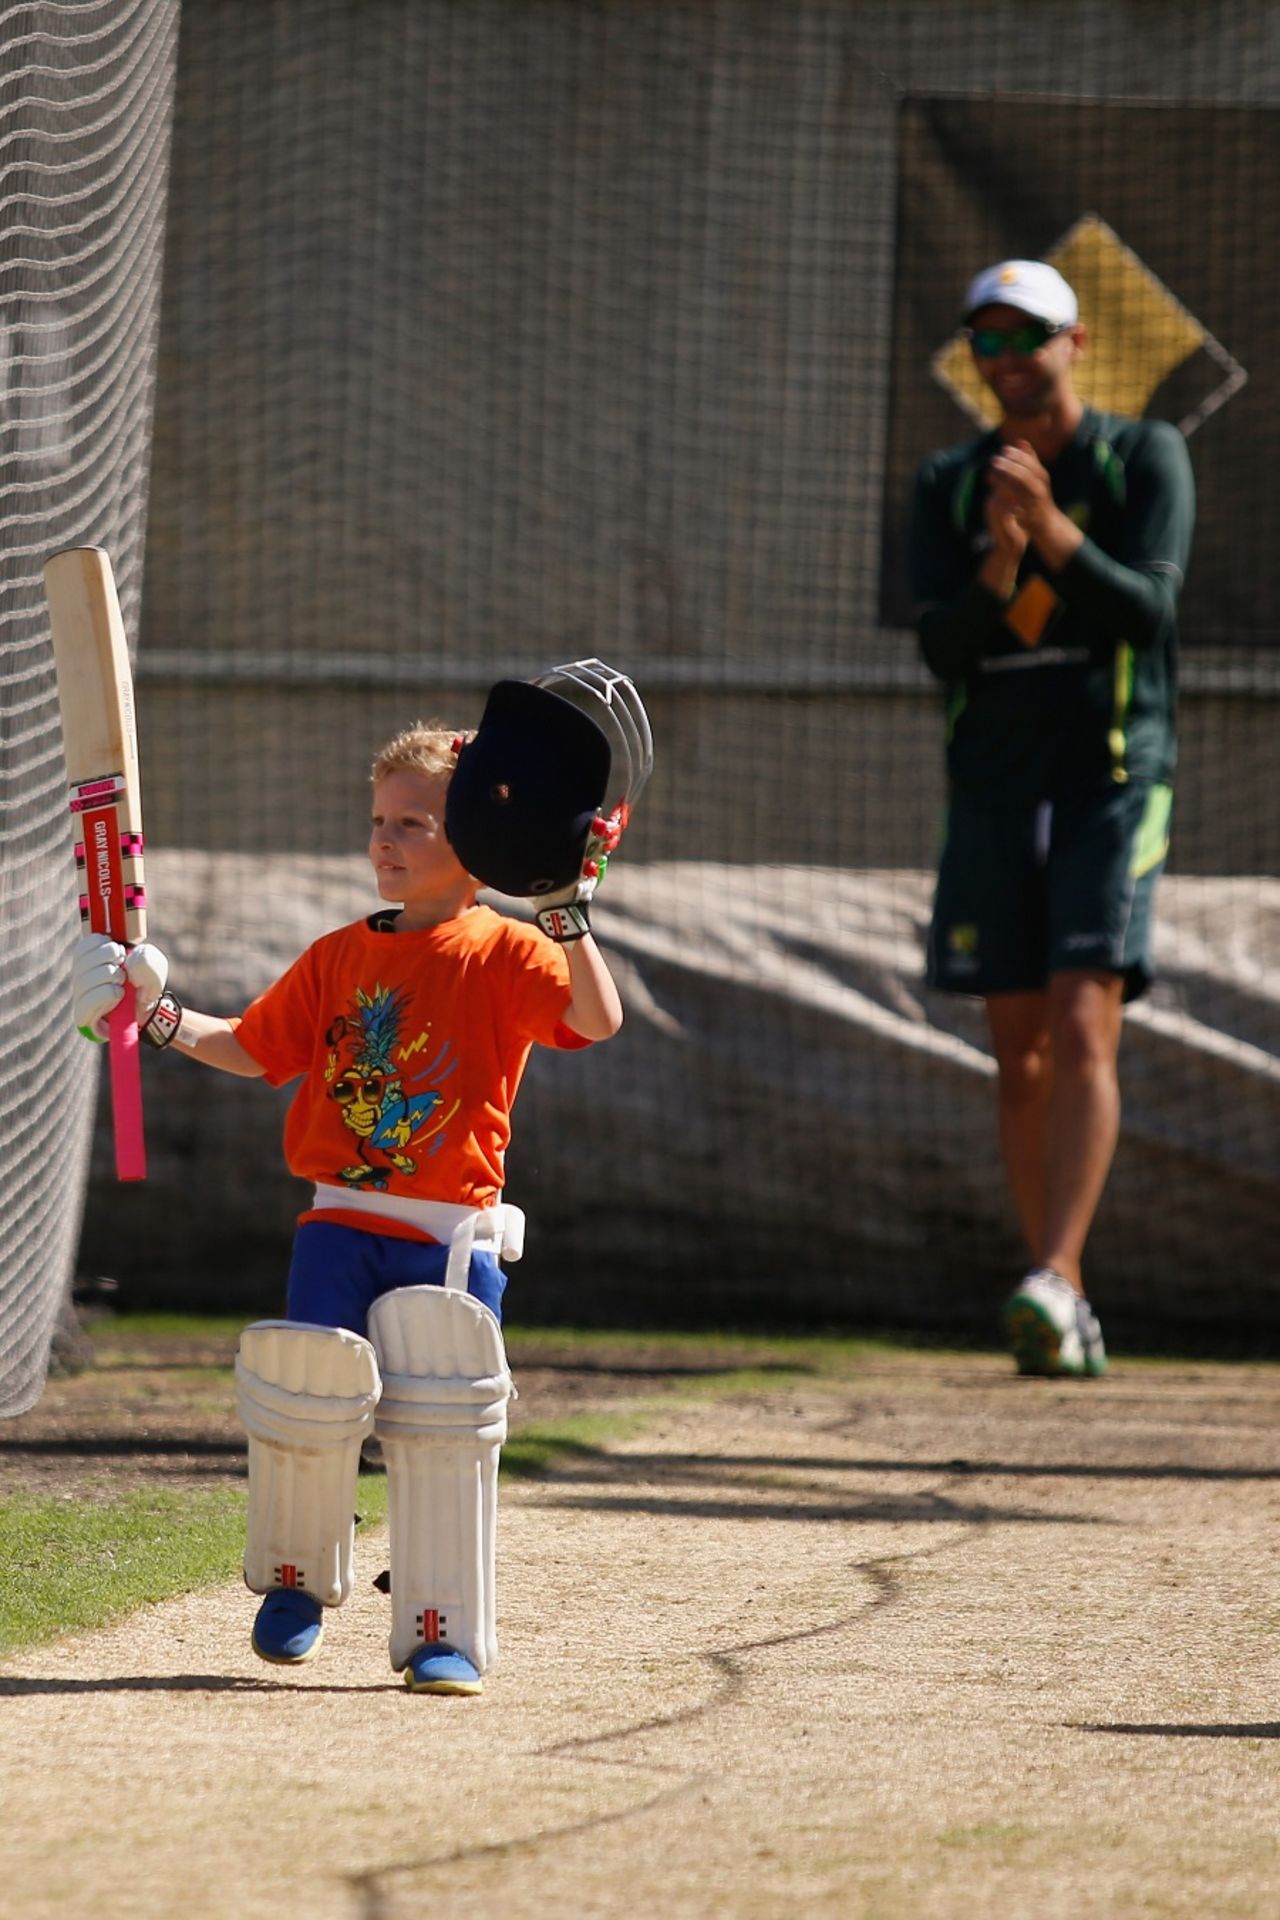 Brad Haddin's son Zac staked his claim for selection in the nets, Australia v India, 3rd Test, Melbourne, December 25, 2014